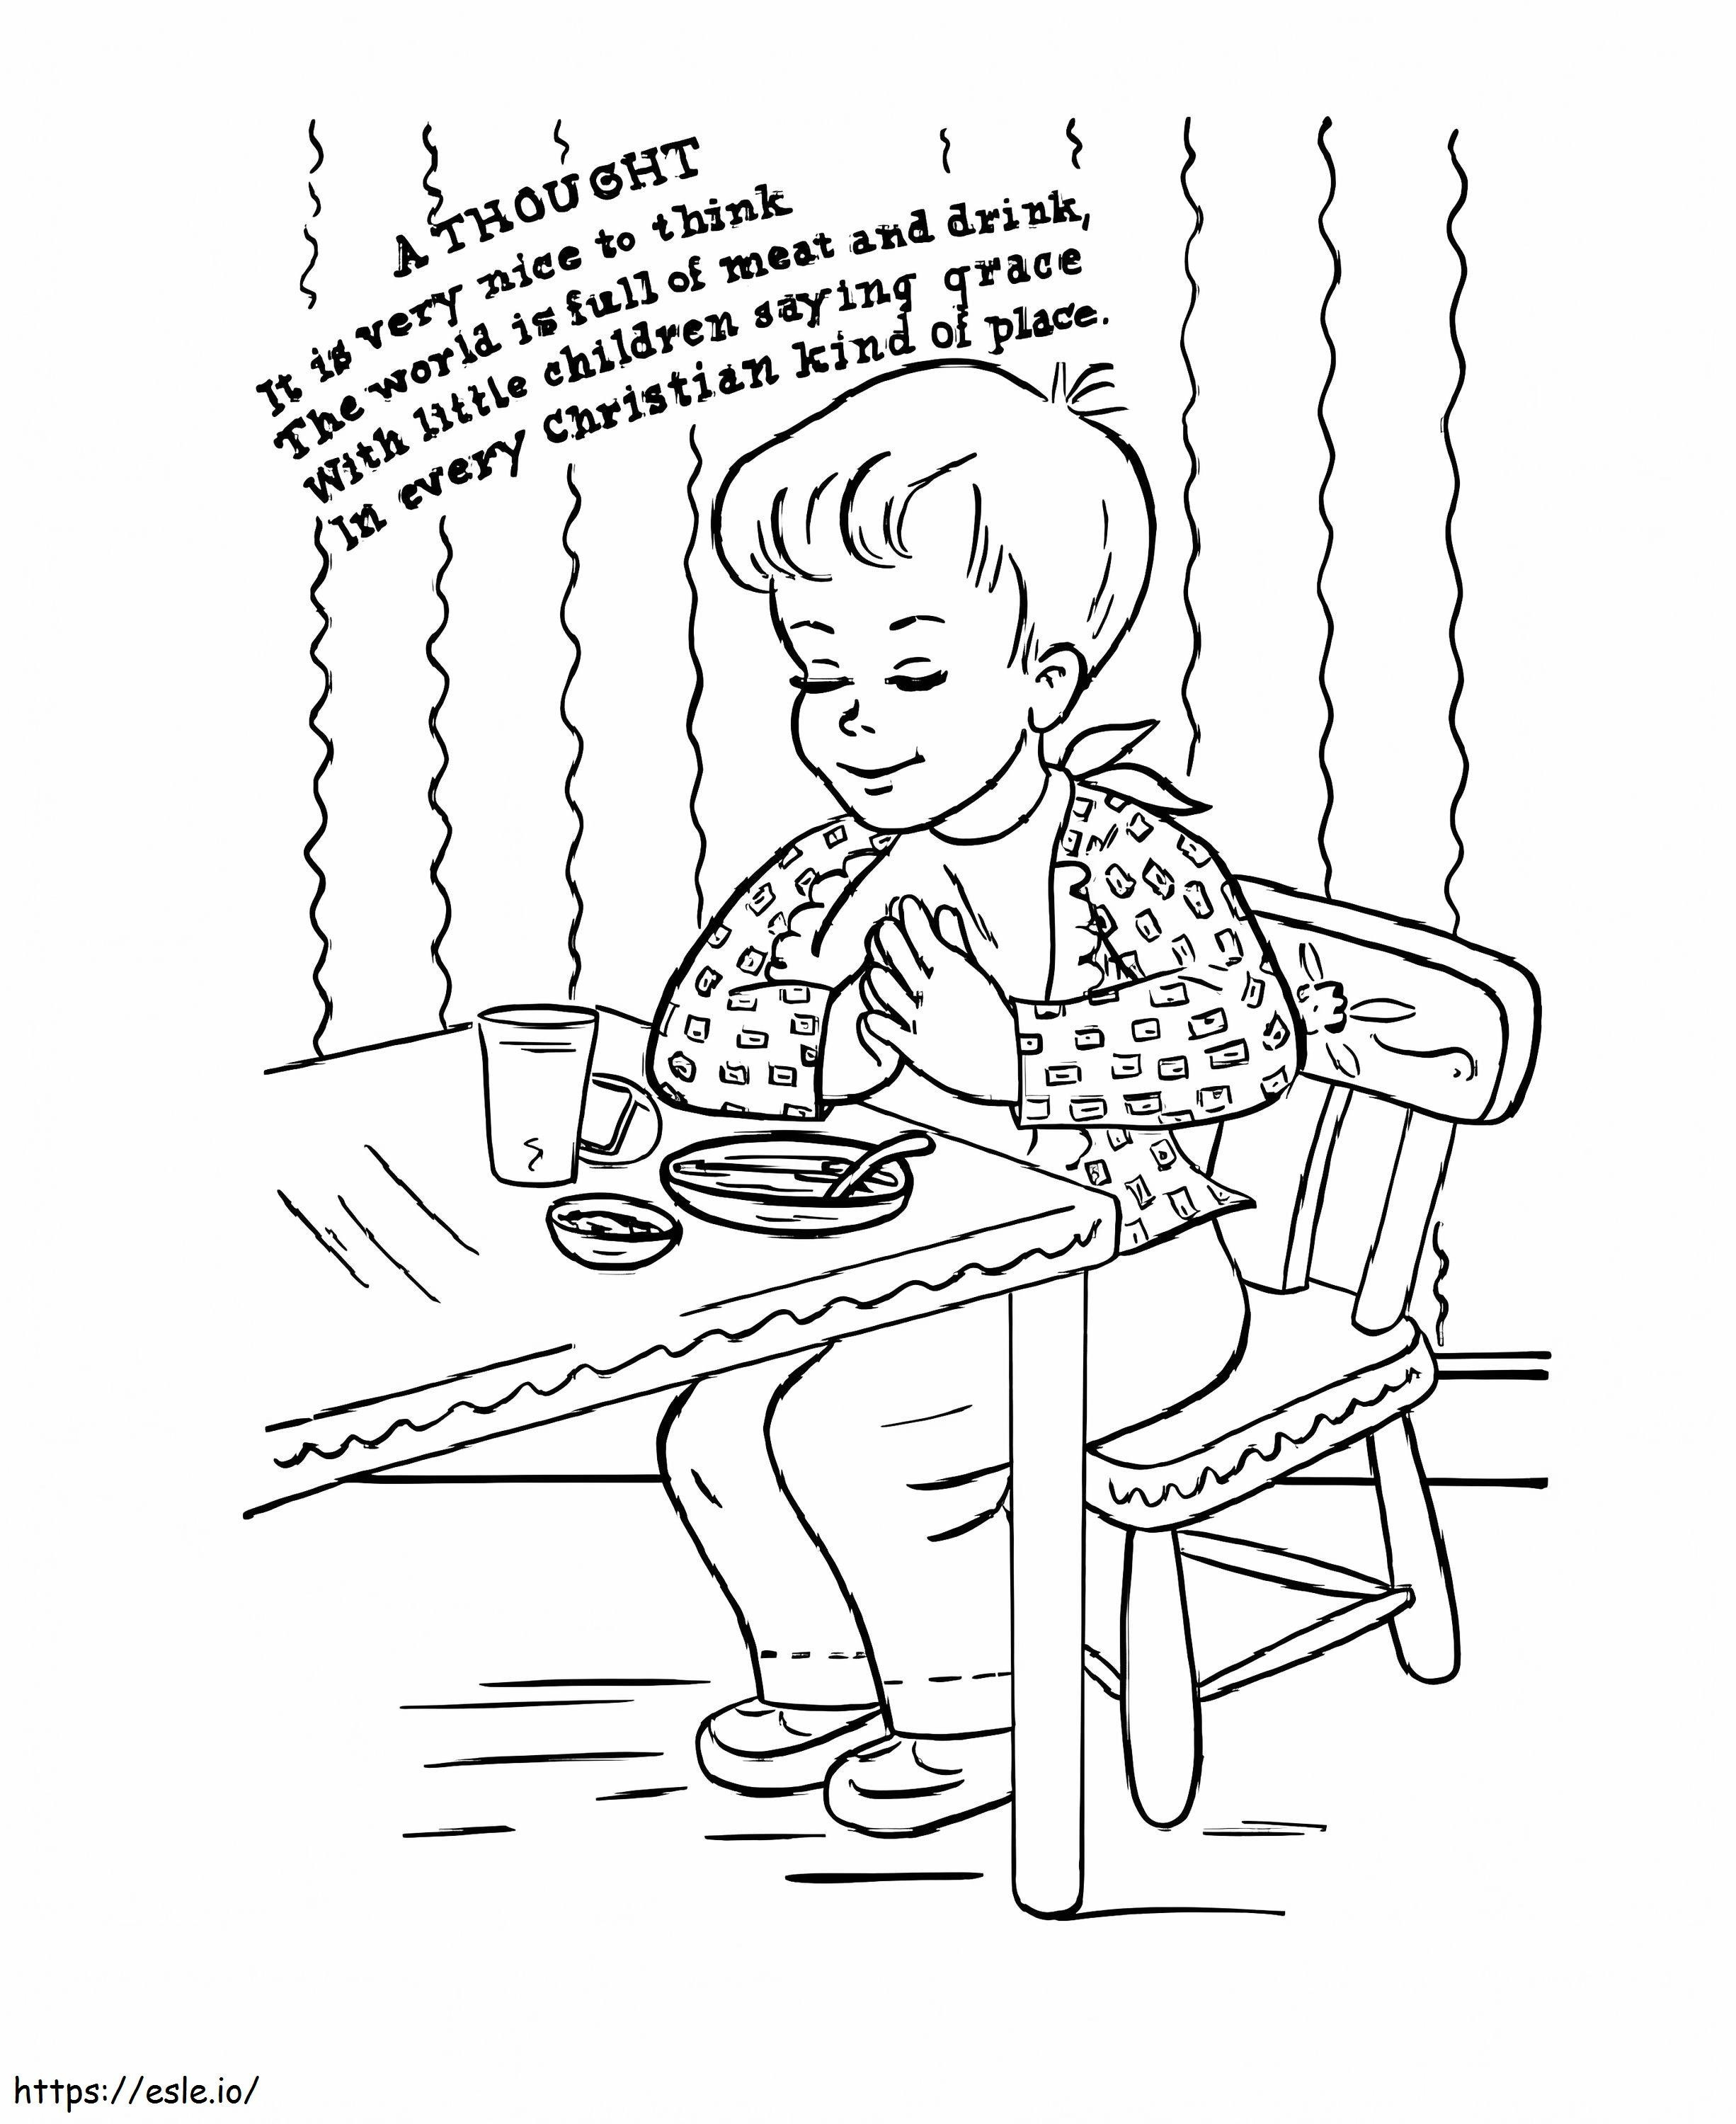 A Thought Nursery Rhymes coloring page